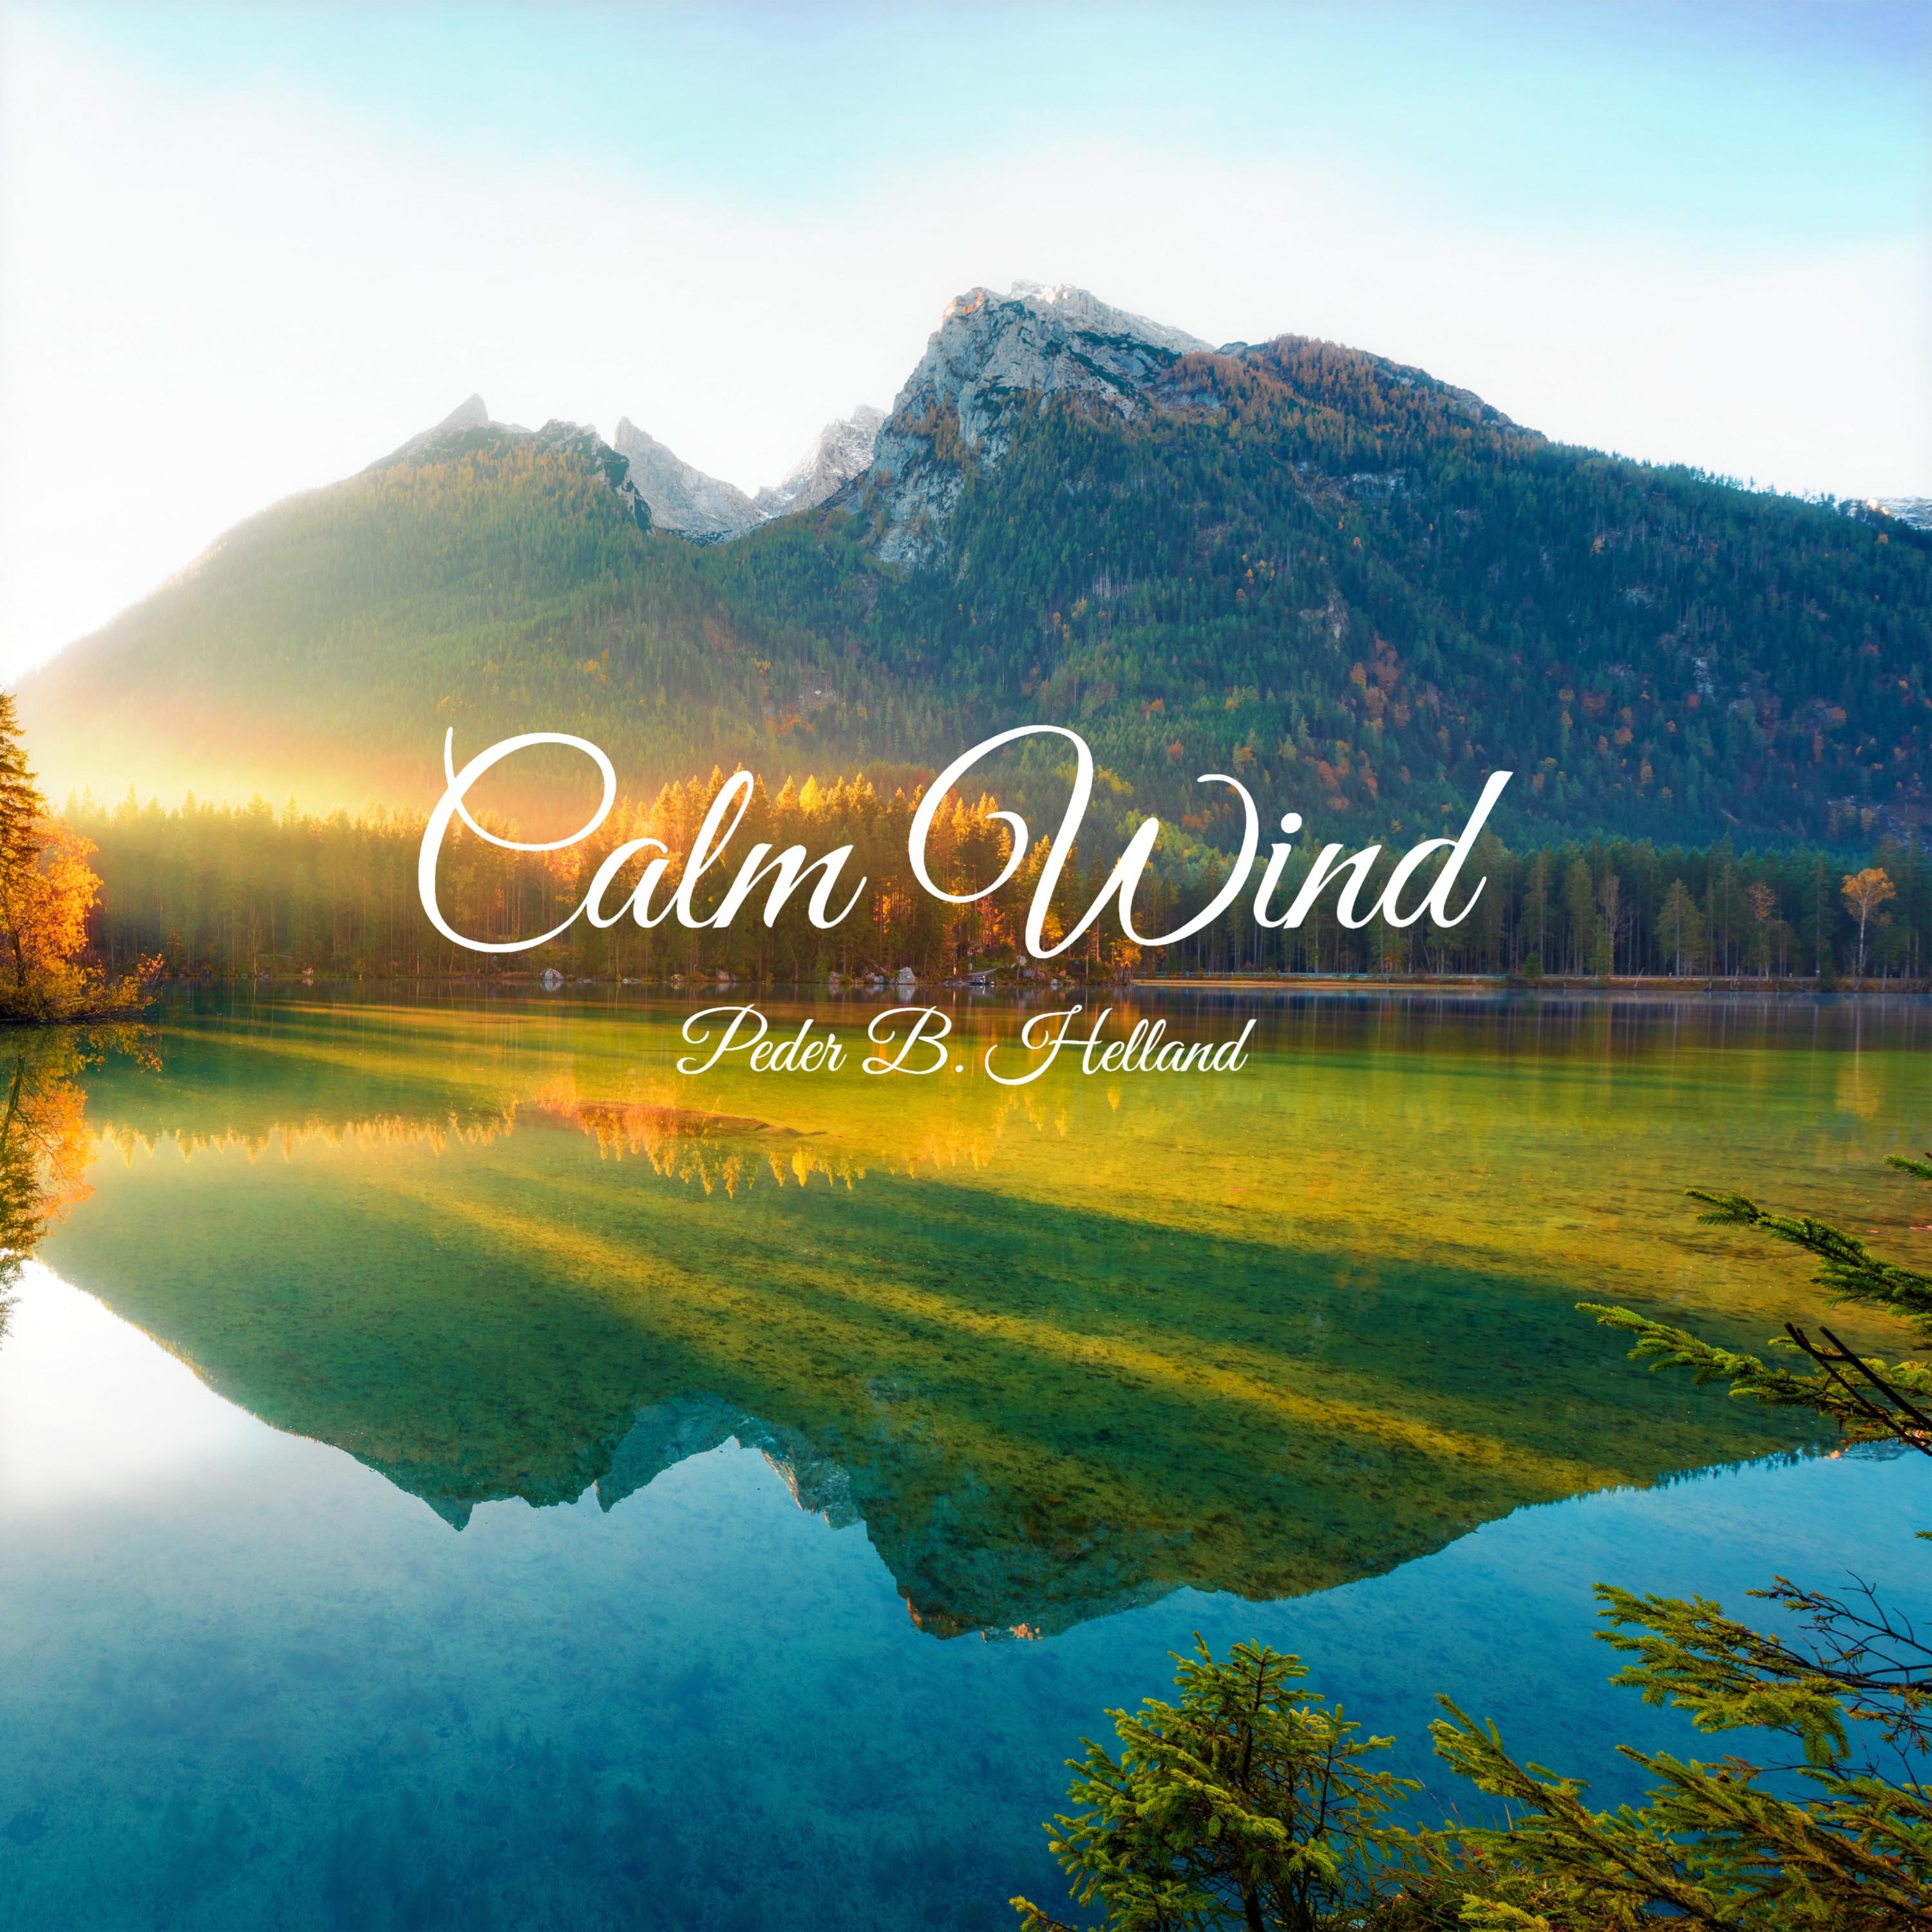 Cover art for the single Calm Wind by Peder B. Helland